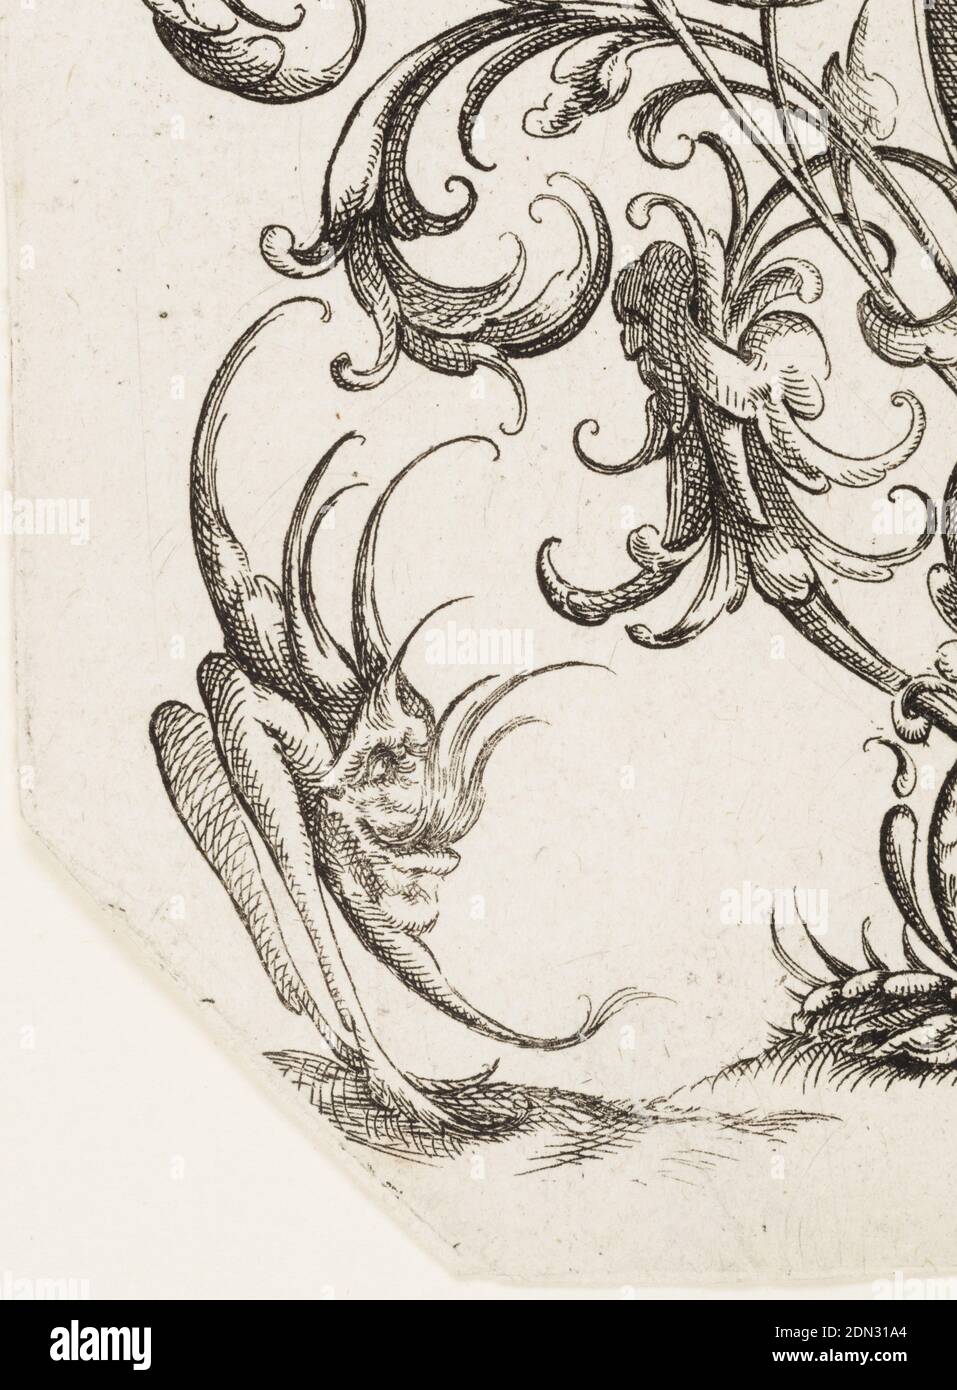 Plate 5, from Die Folge der phantastischen Schmucksträße (Suite of Fantastic Ornamental Bouquets), Wendel Dietterlin the Younger, German, active 1610–1614, Etching on laid paper, Two grotesque birds flank the vase from which the nosegay rises., Germany, 1614, ornament, Print Stock Photo